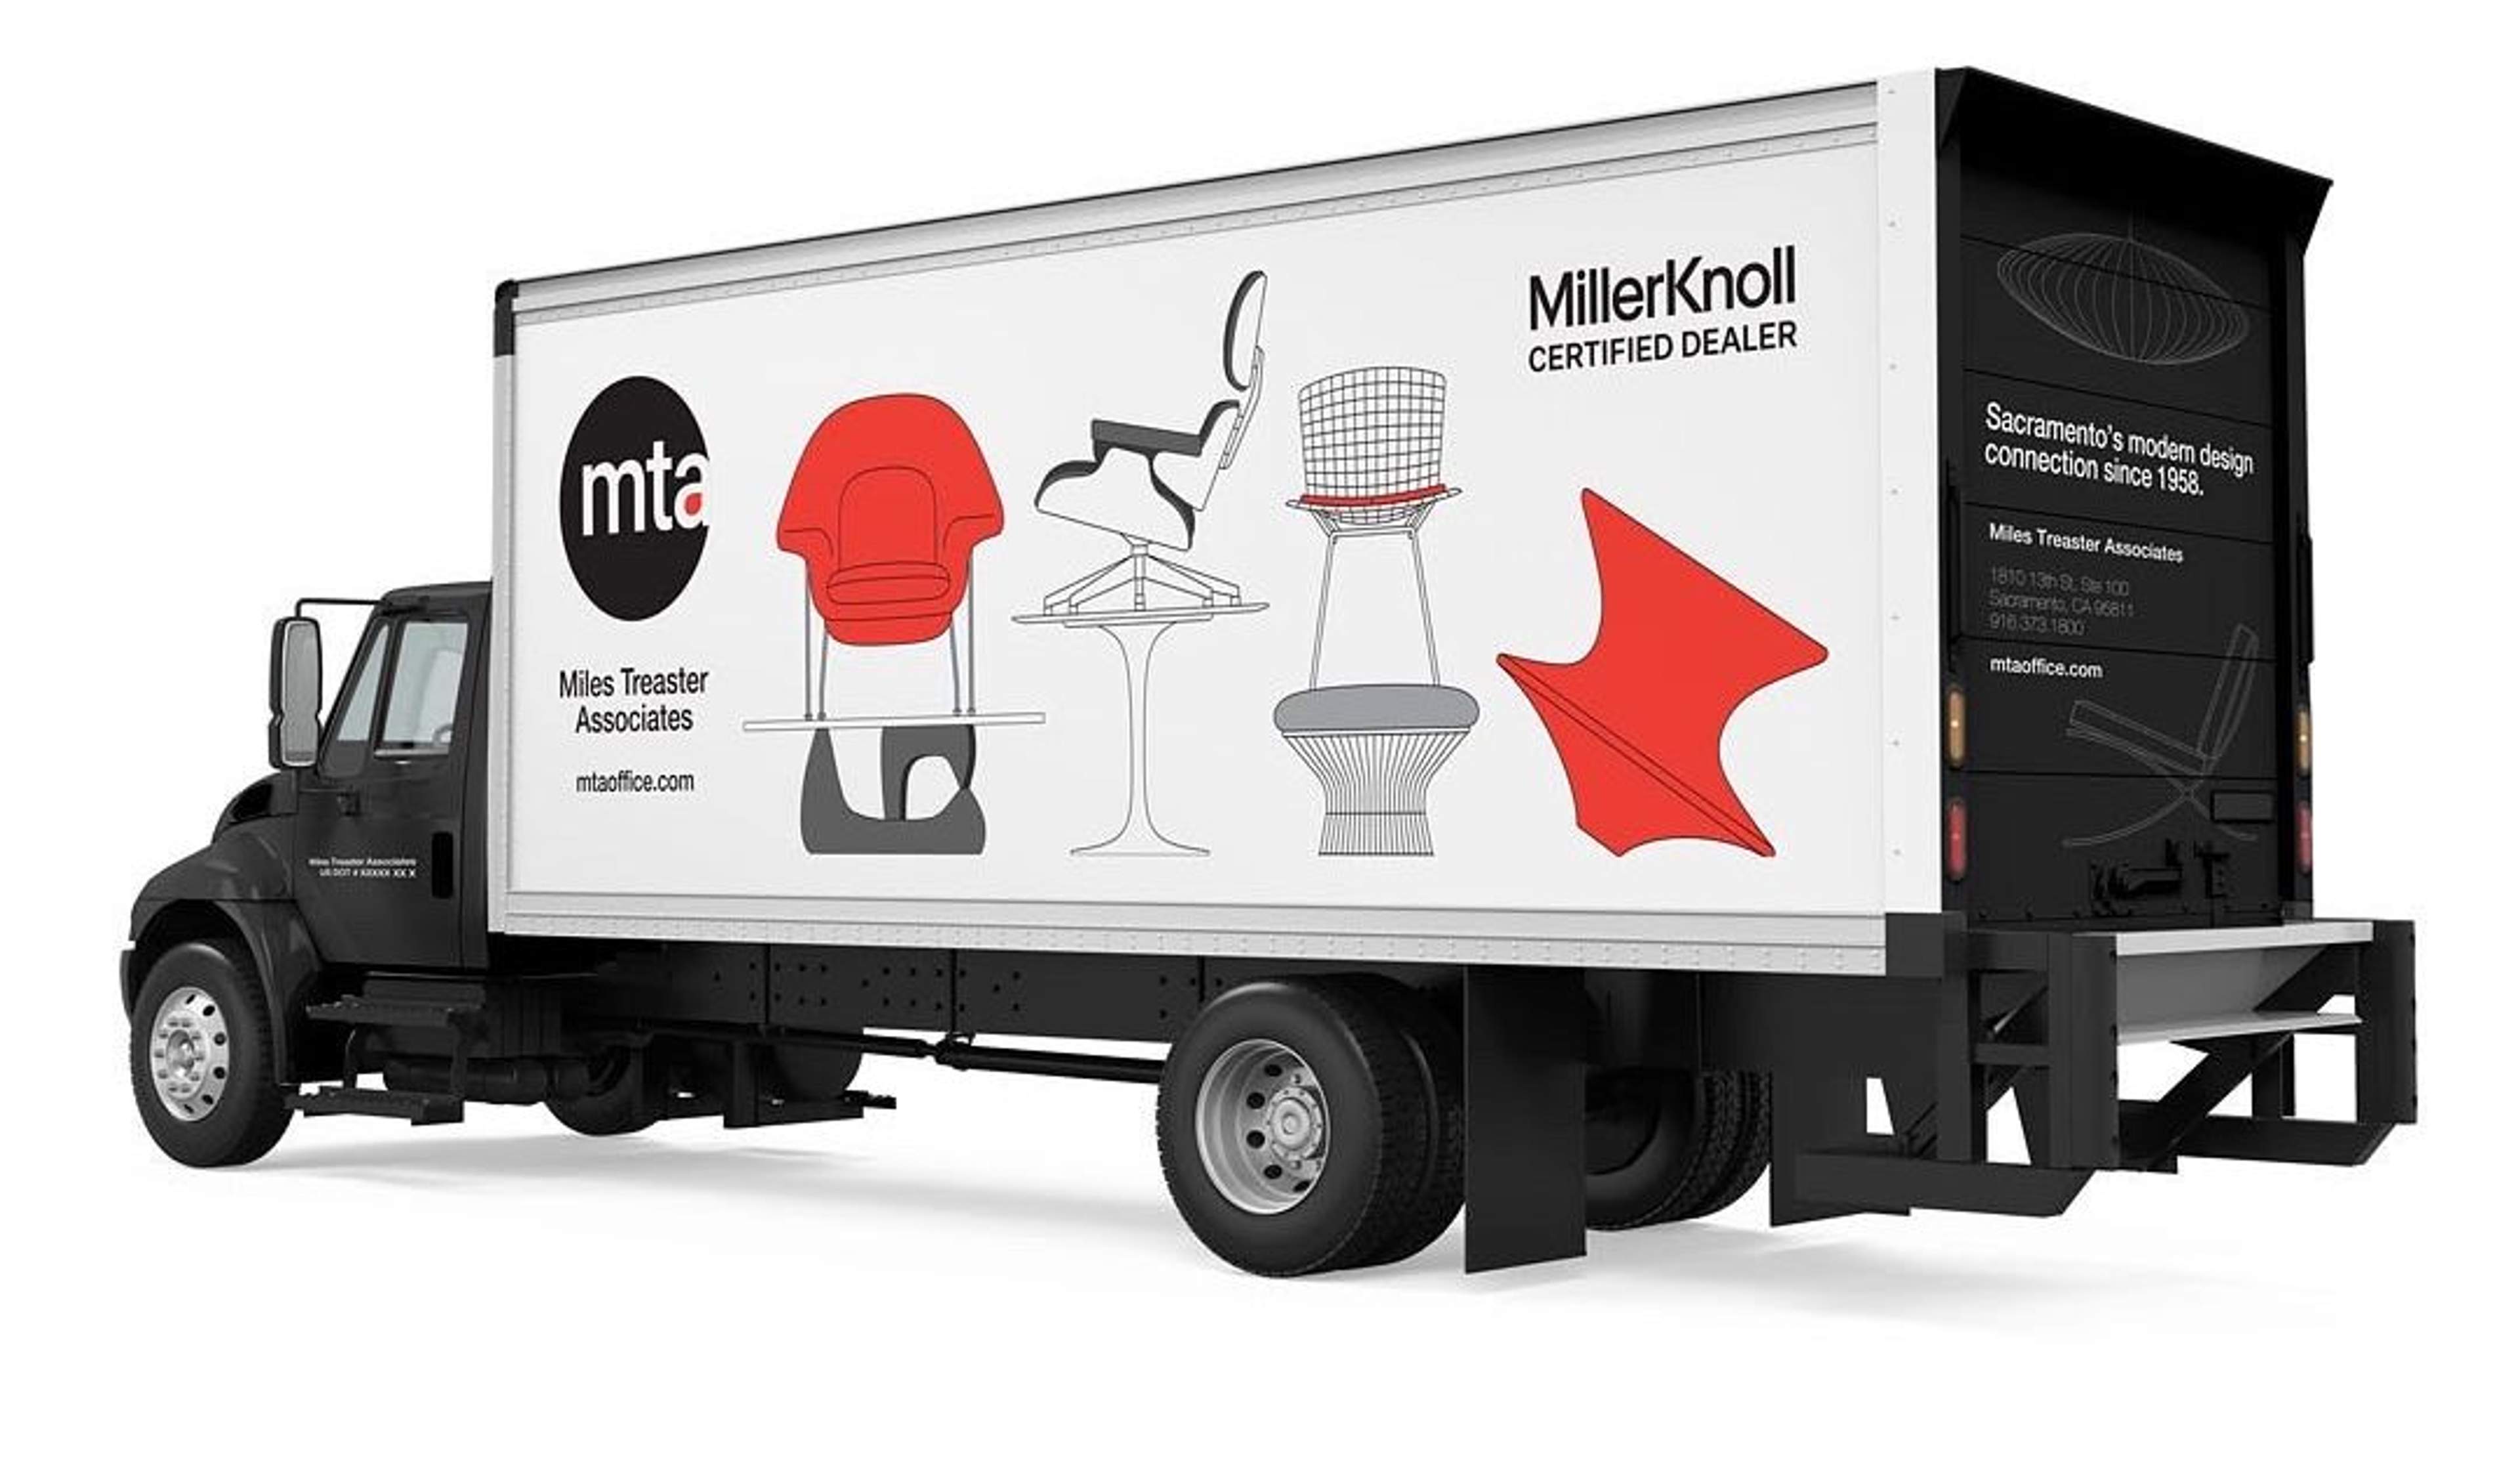 Branding campaign by Brenna Hamilton for Miles Treaster Associates (MTA) launch as a MillerKnoll Platinum Certified Dealer.